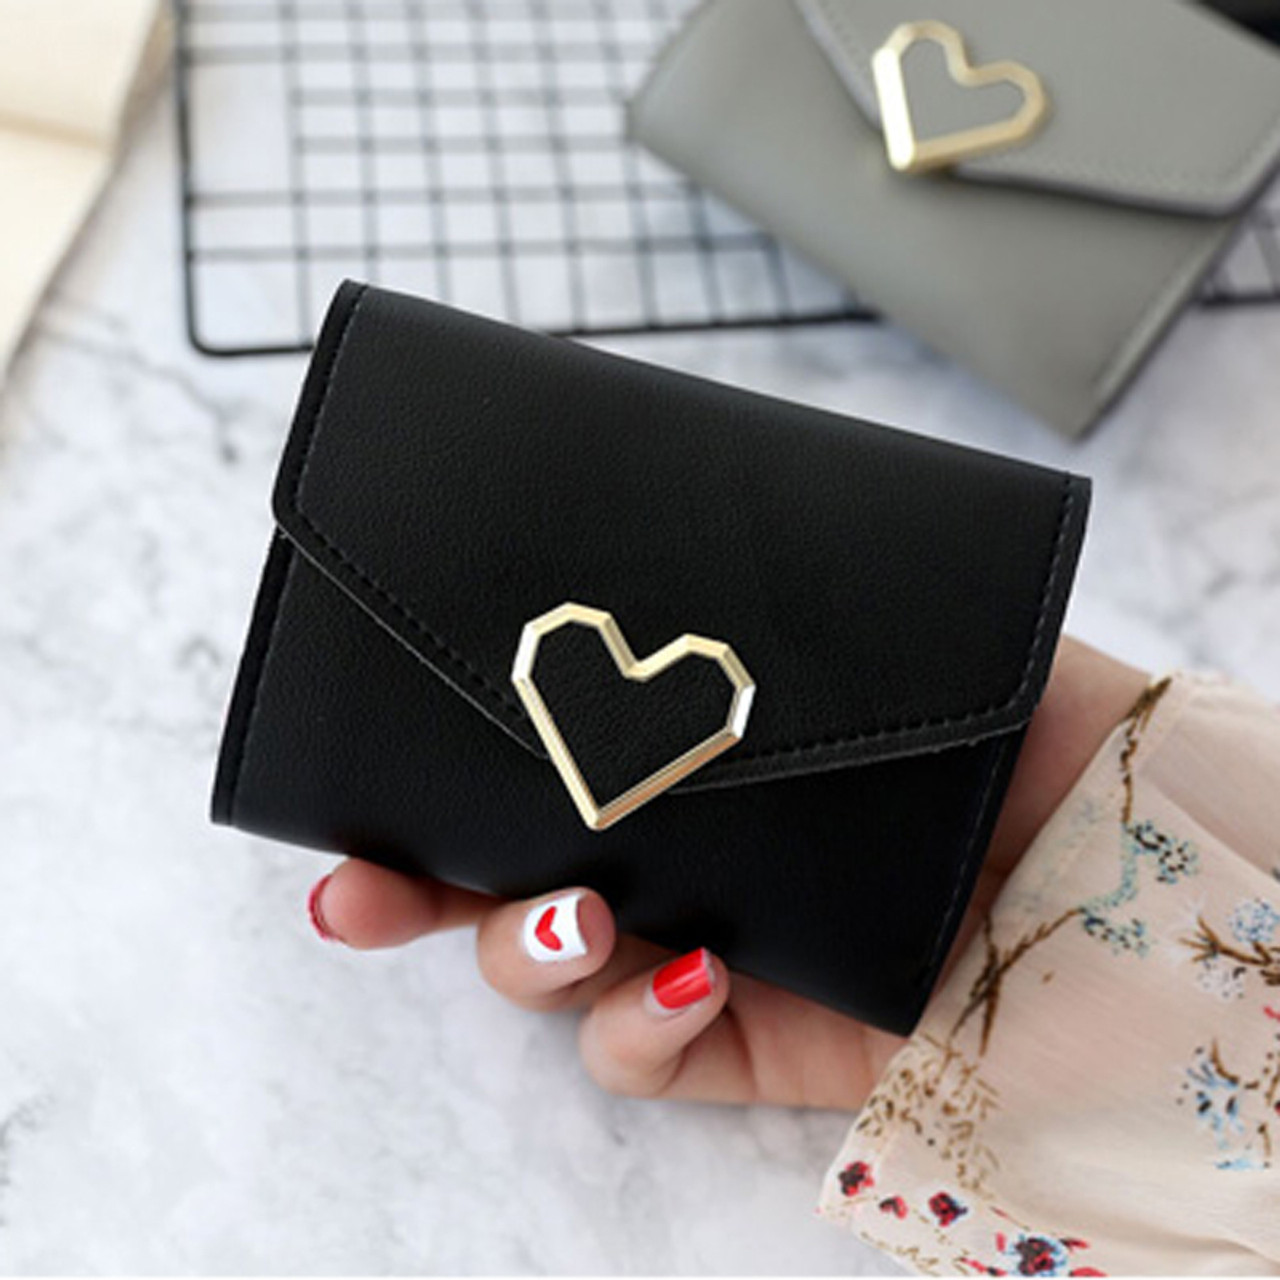 Slim Leather Mini Wallet For Women Cute And Thin Suede Coin Purse With  Zipper For Cards And Small Essentials From Sarahzhang88, $3.74 | DHgate.Com